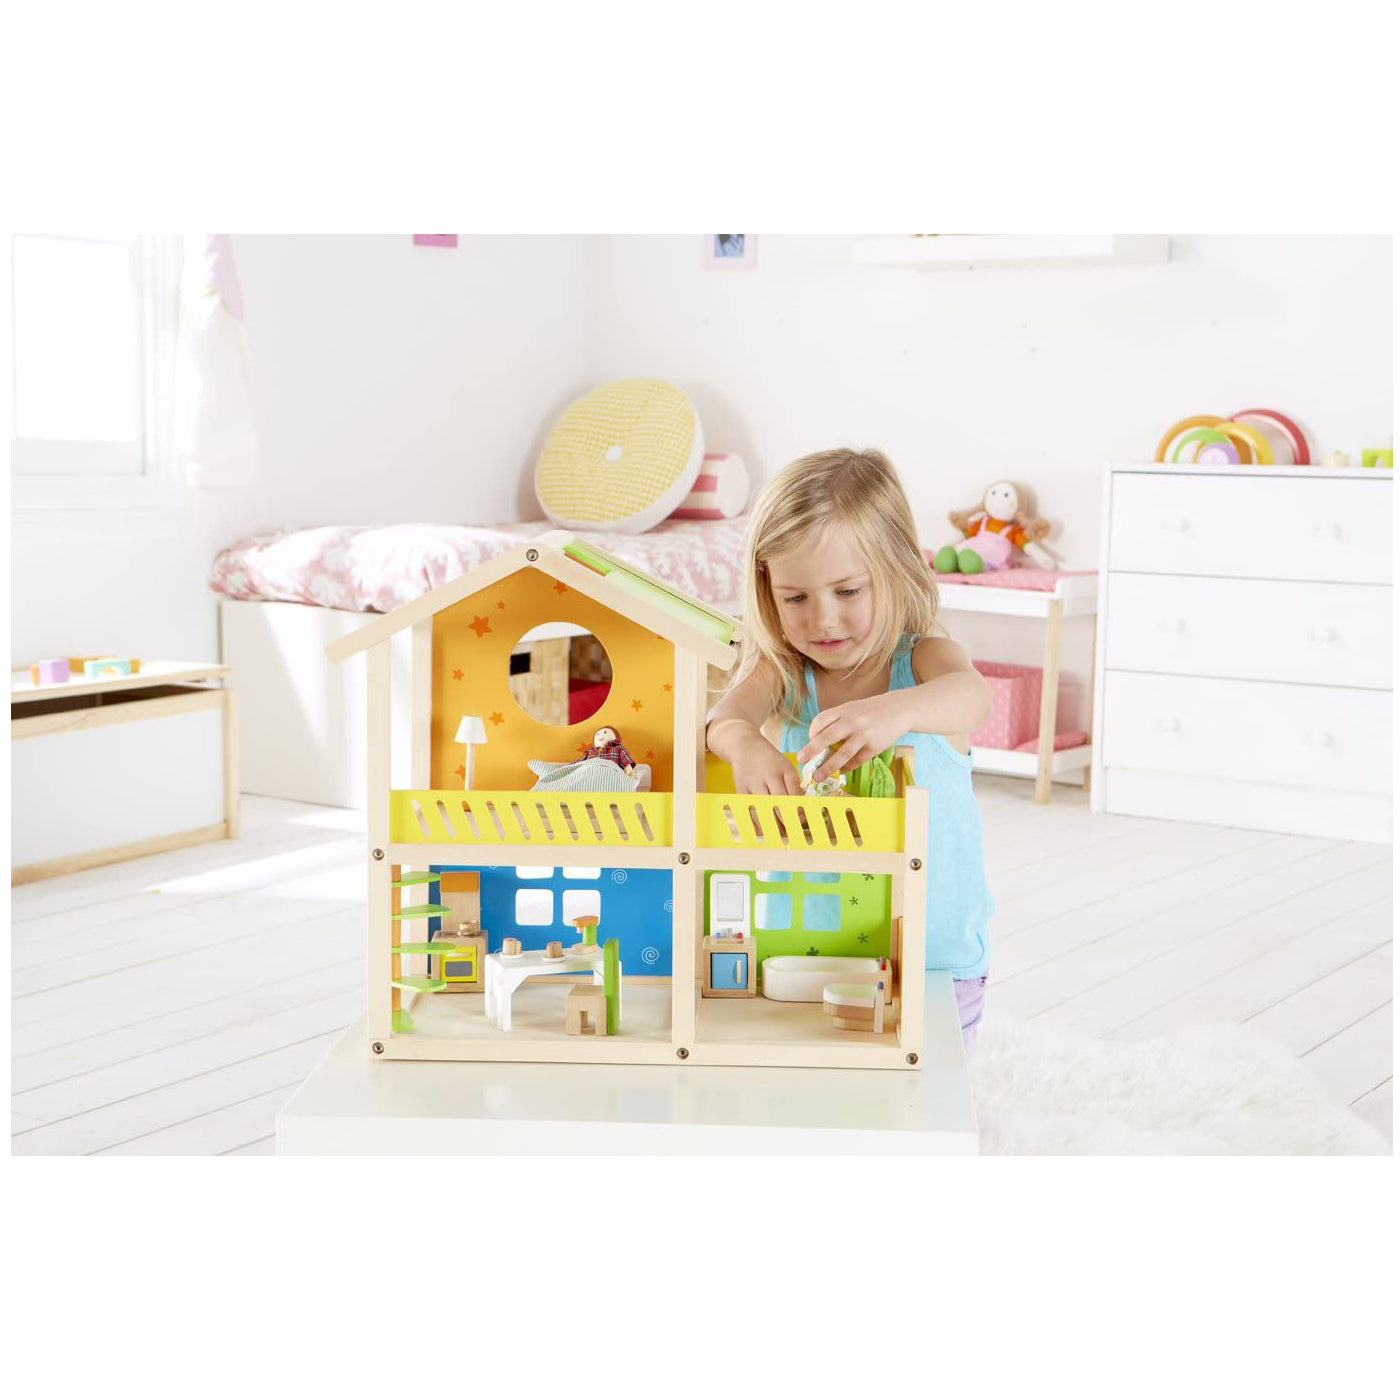 Hape Happy Villa Kids Wooden Doll House Set | 2 Story Dolls Villa with Furniture and Accessories